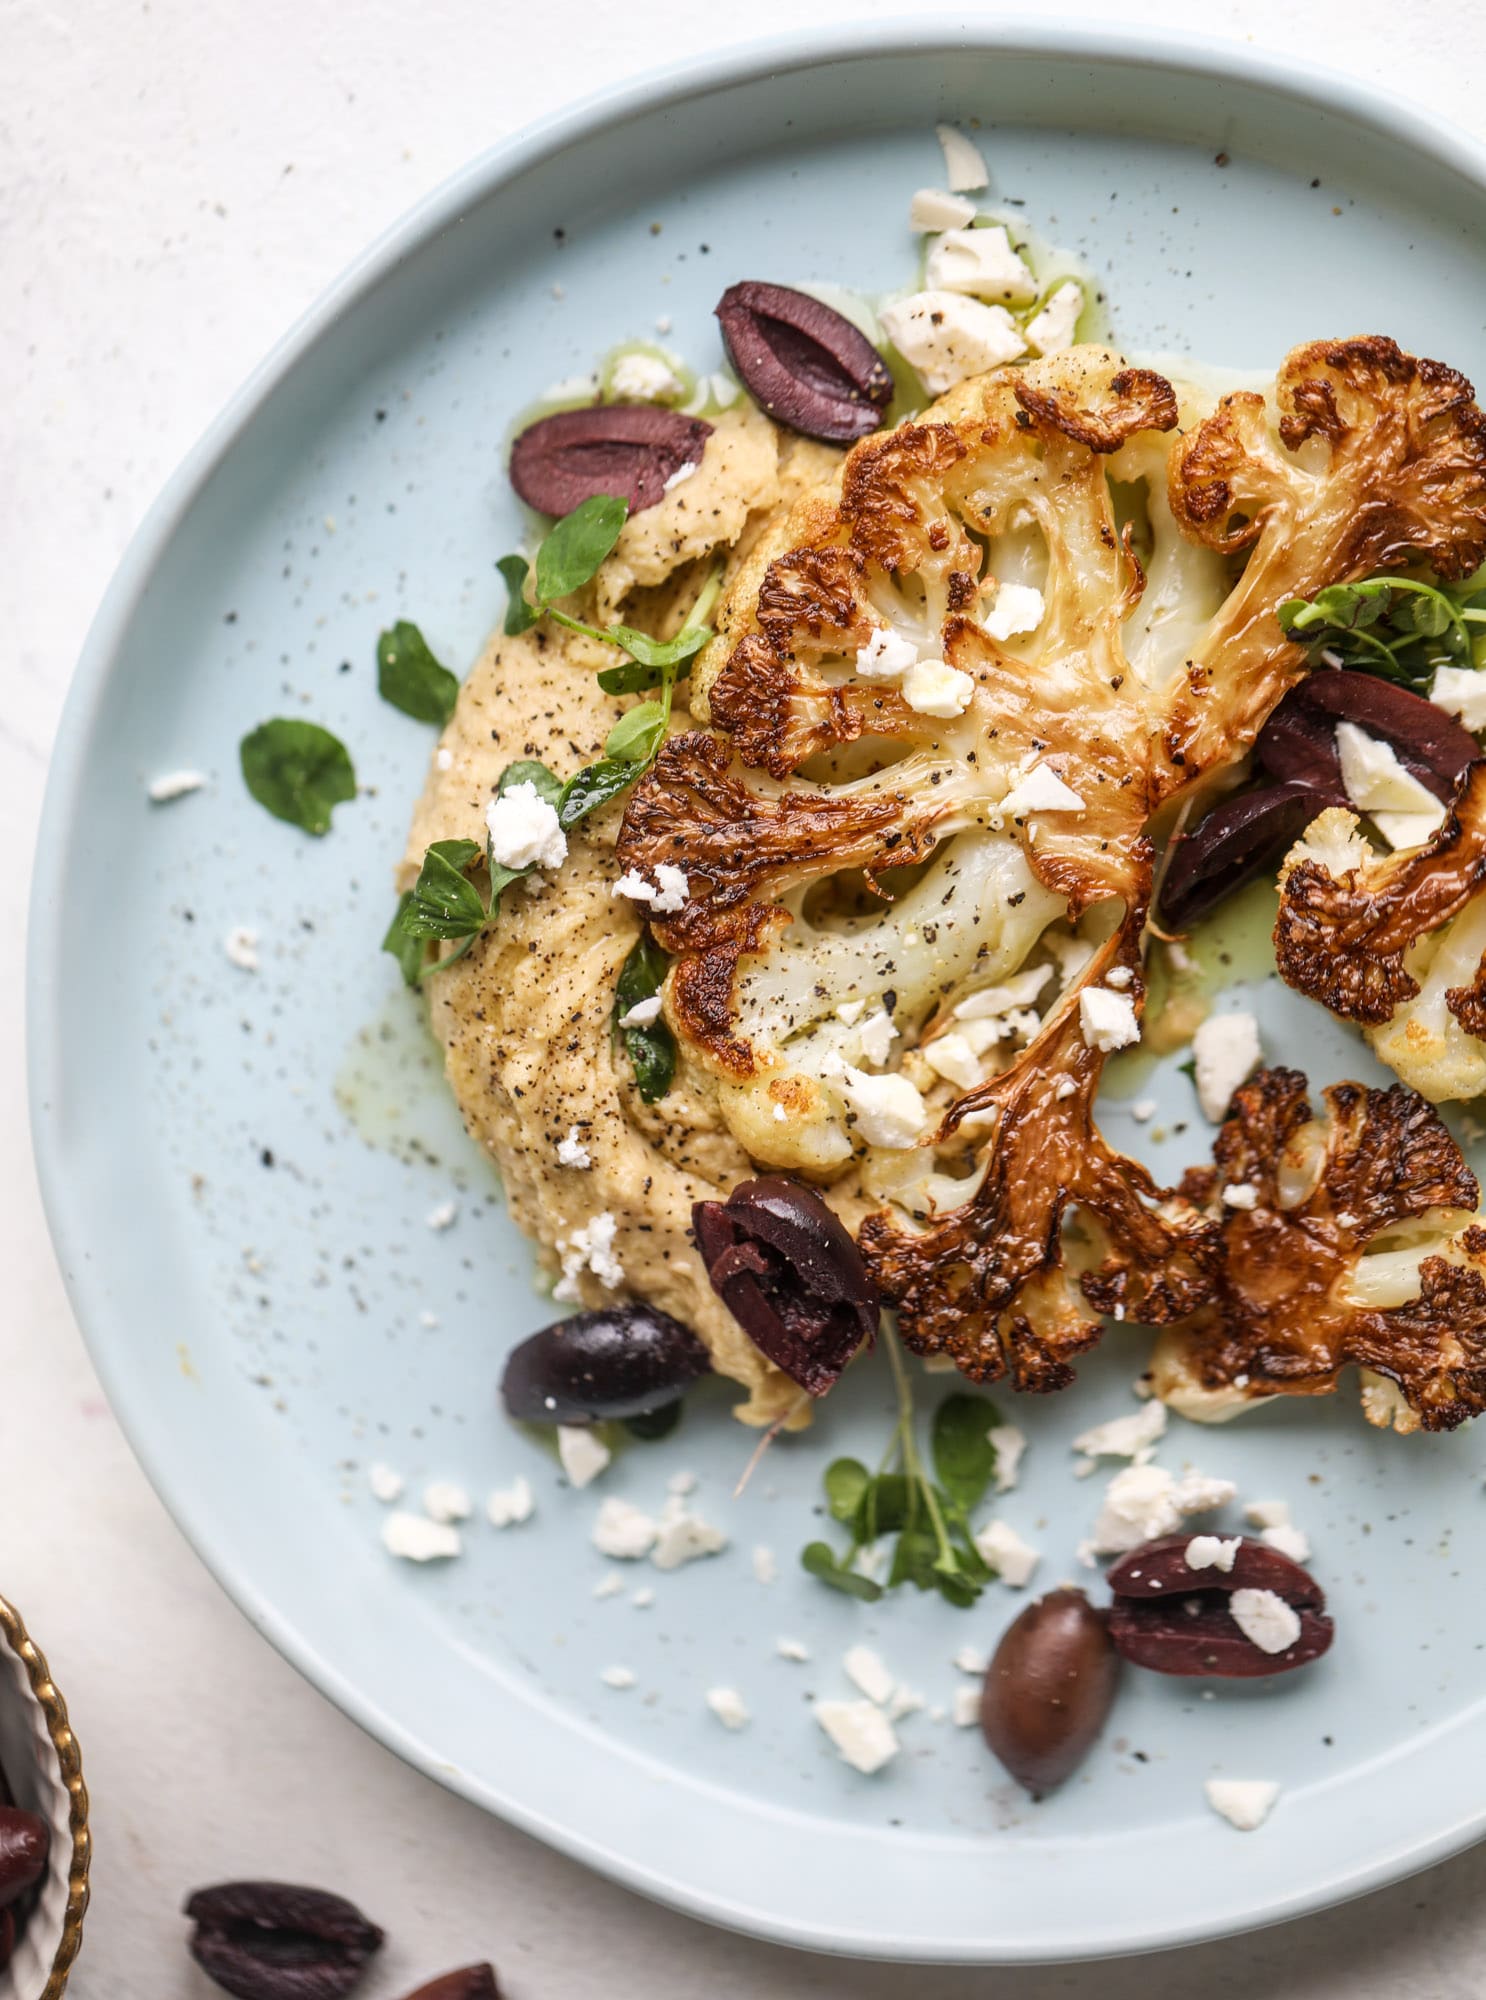 This roasted cauliflower with hummus, olives and feta is super flavorful and a wonderful meal, side dish or snack. Flavorful roasted cauliflower, creamy hummus, briney olives and tangy feta come together to make a major taste explosion. I howsweeteats.com #roasted #cauliflower #hummus #olives #feta